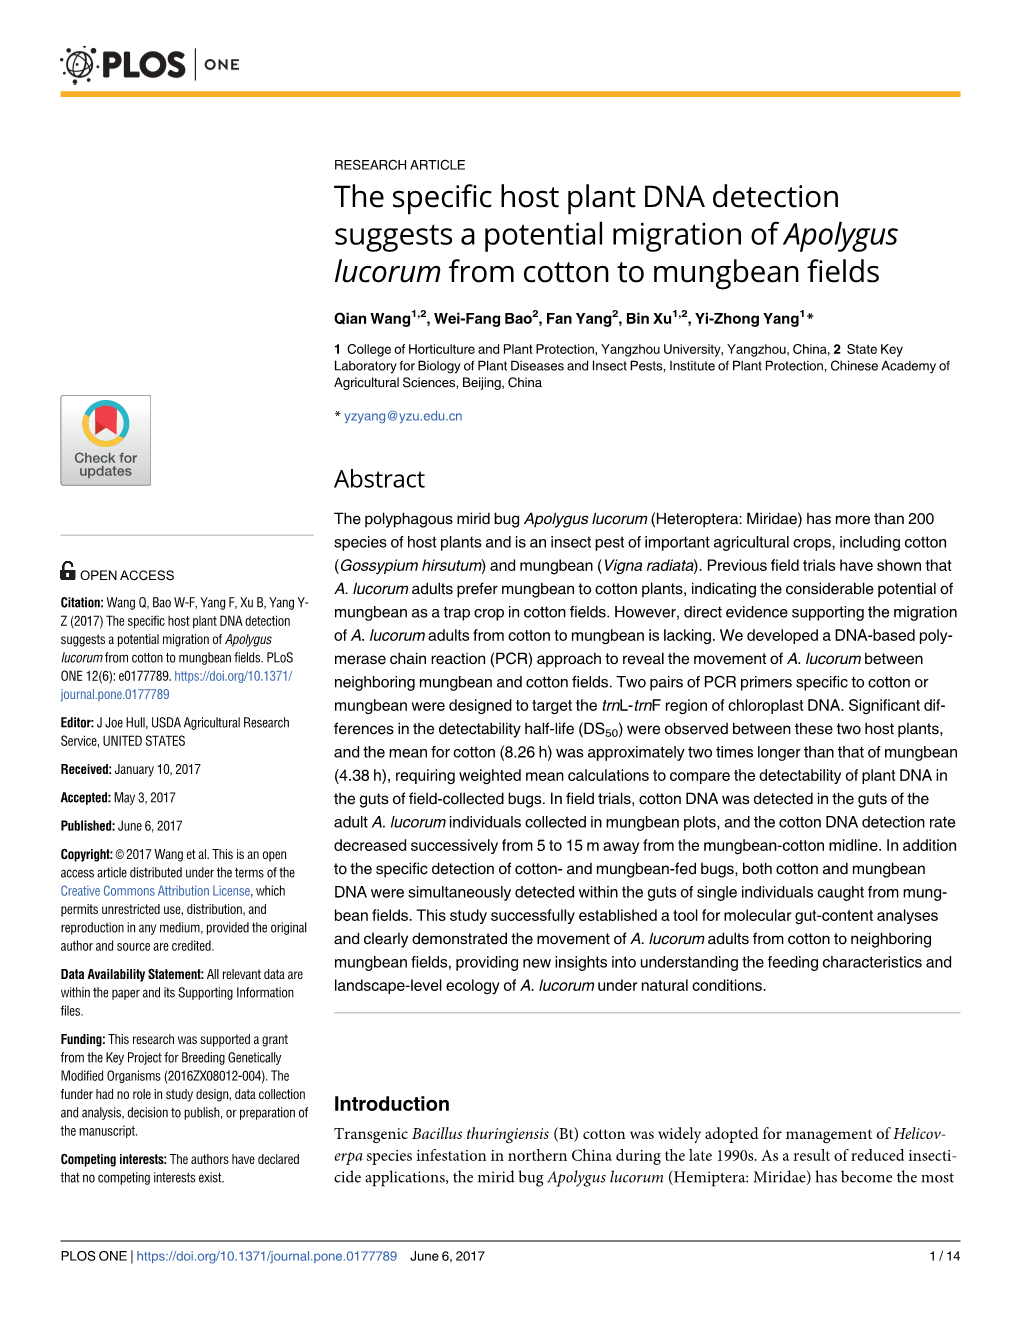 The Specific Host Plant DNA Detection Suggests a Potential Migration of Apolygus Lucorum from Cotton to Mungbean Fields